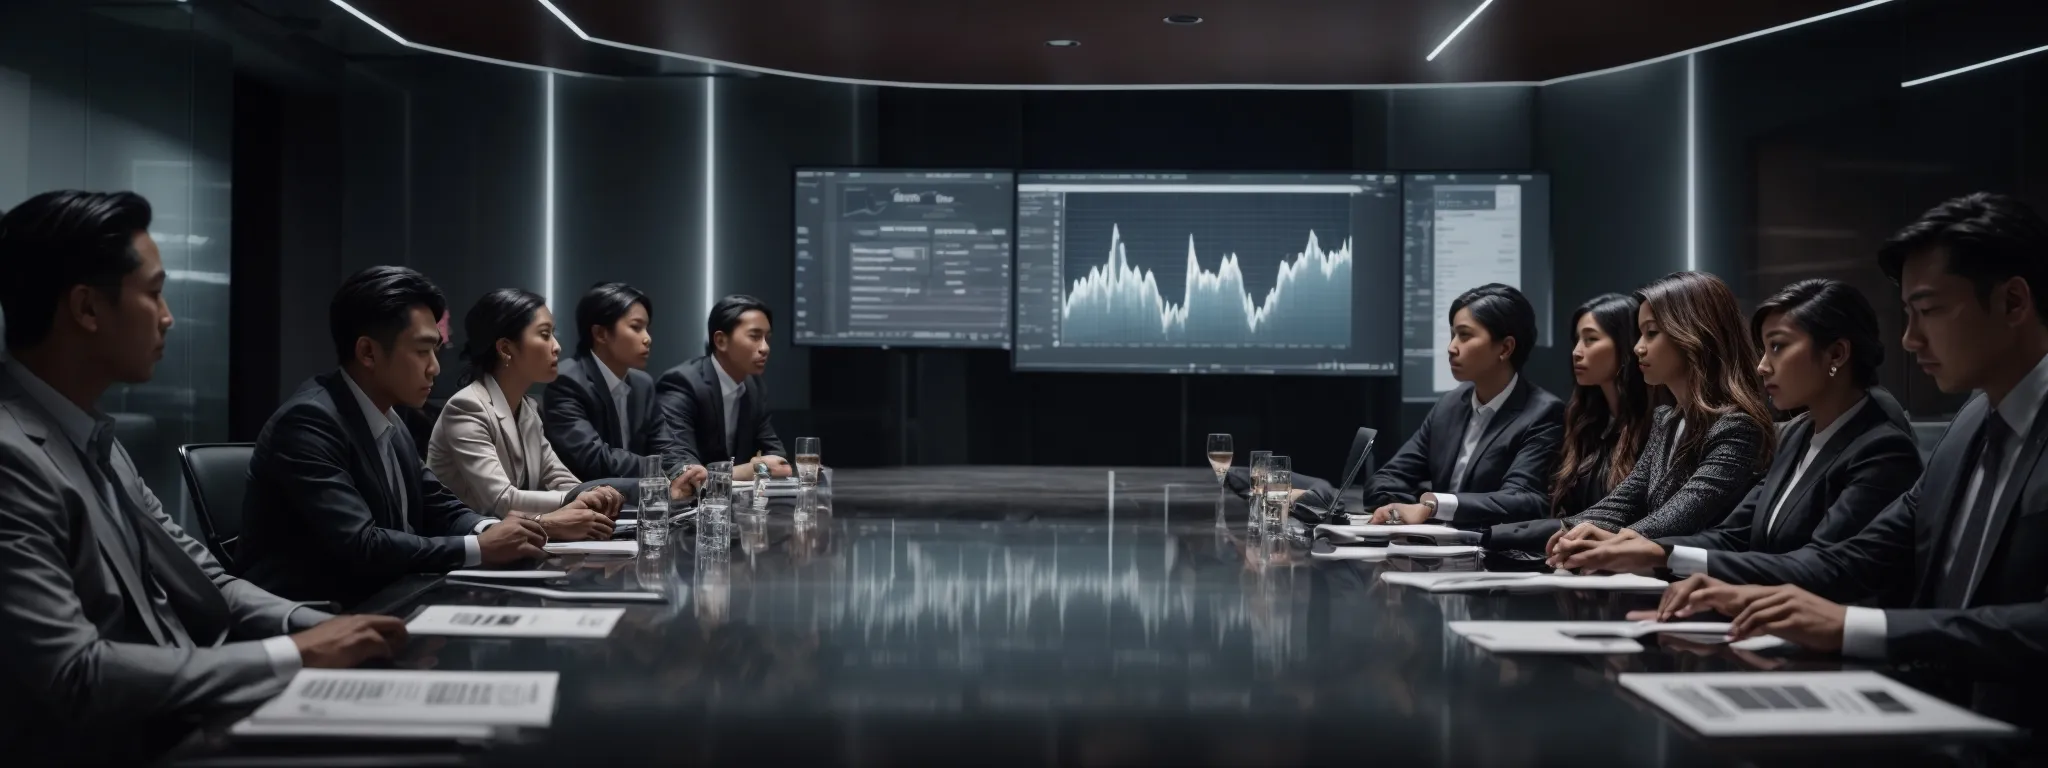 a group of professionals engaged around a sleek, modern conference table, intensely focused on a digital screen displaying a rising analytics graph.